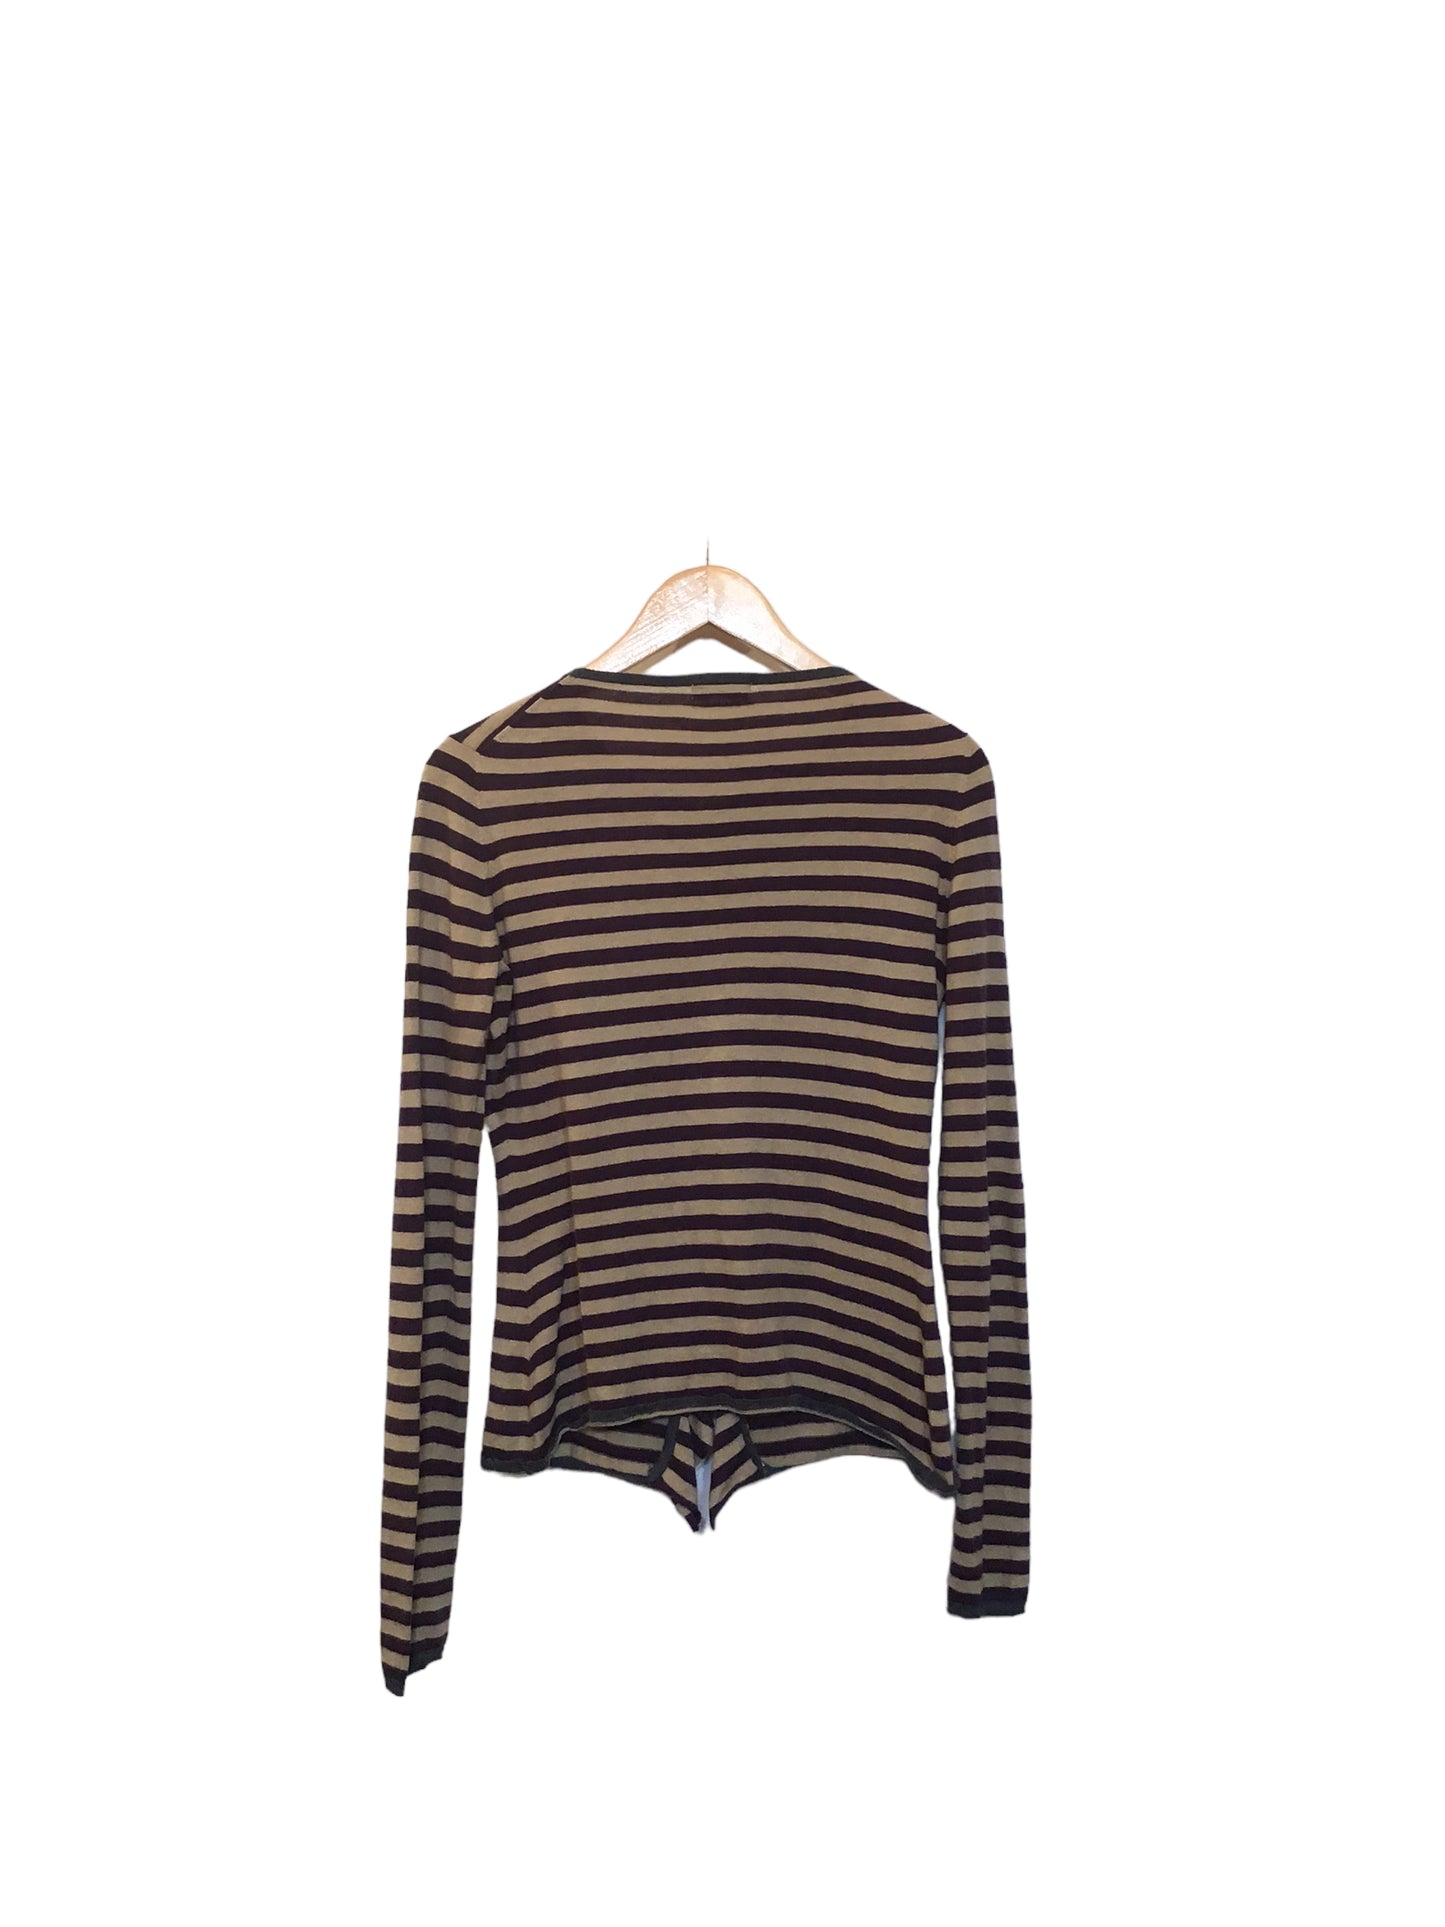 Hoss Knitted Long Sleeved Top (Size S)